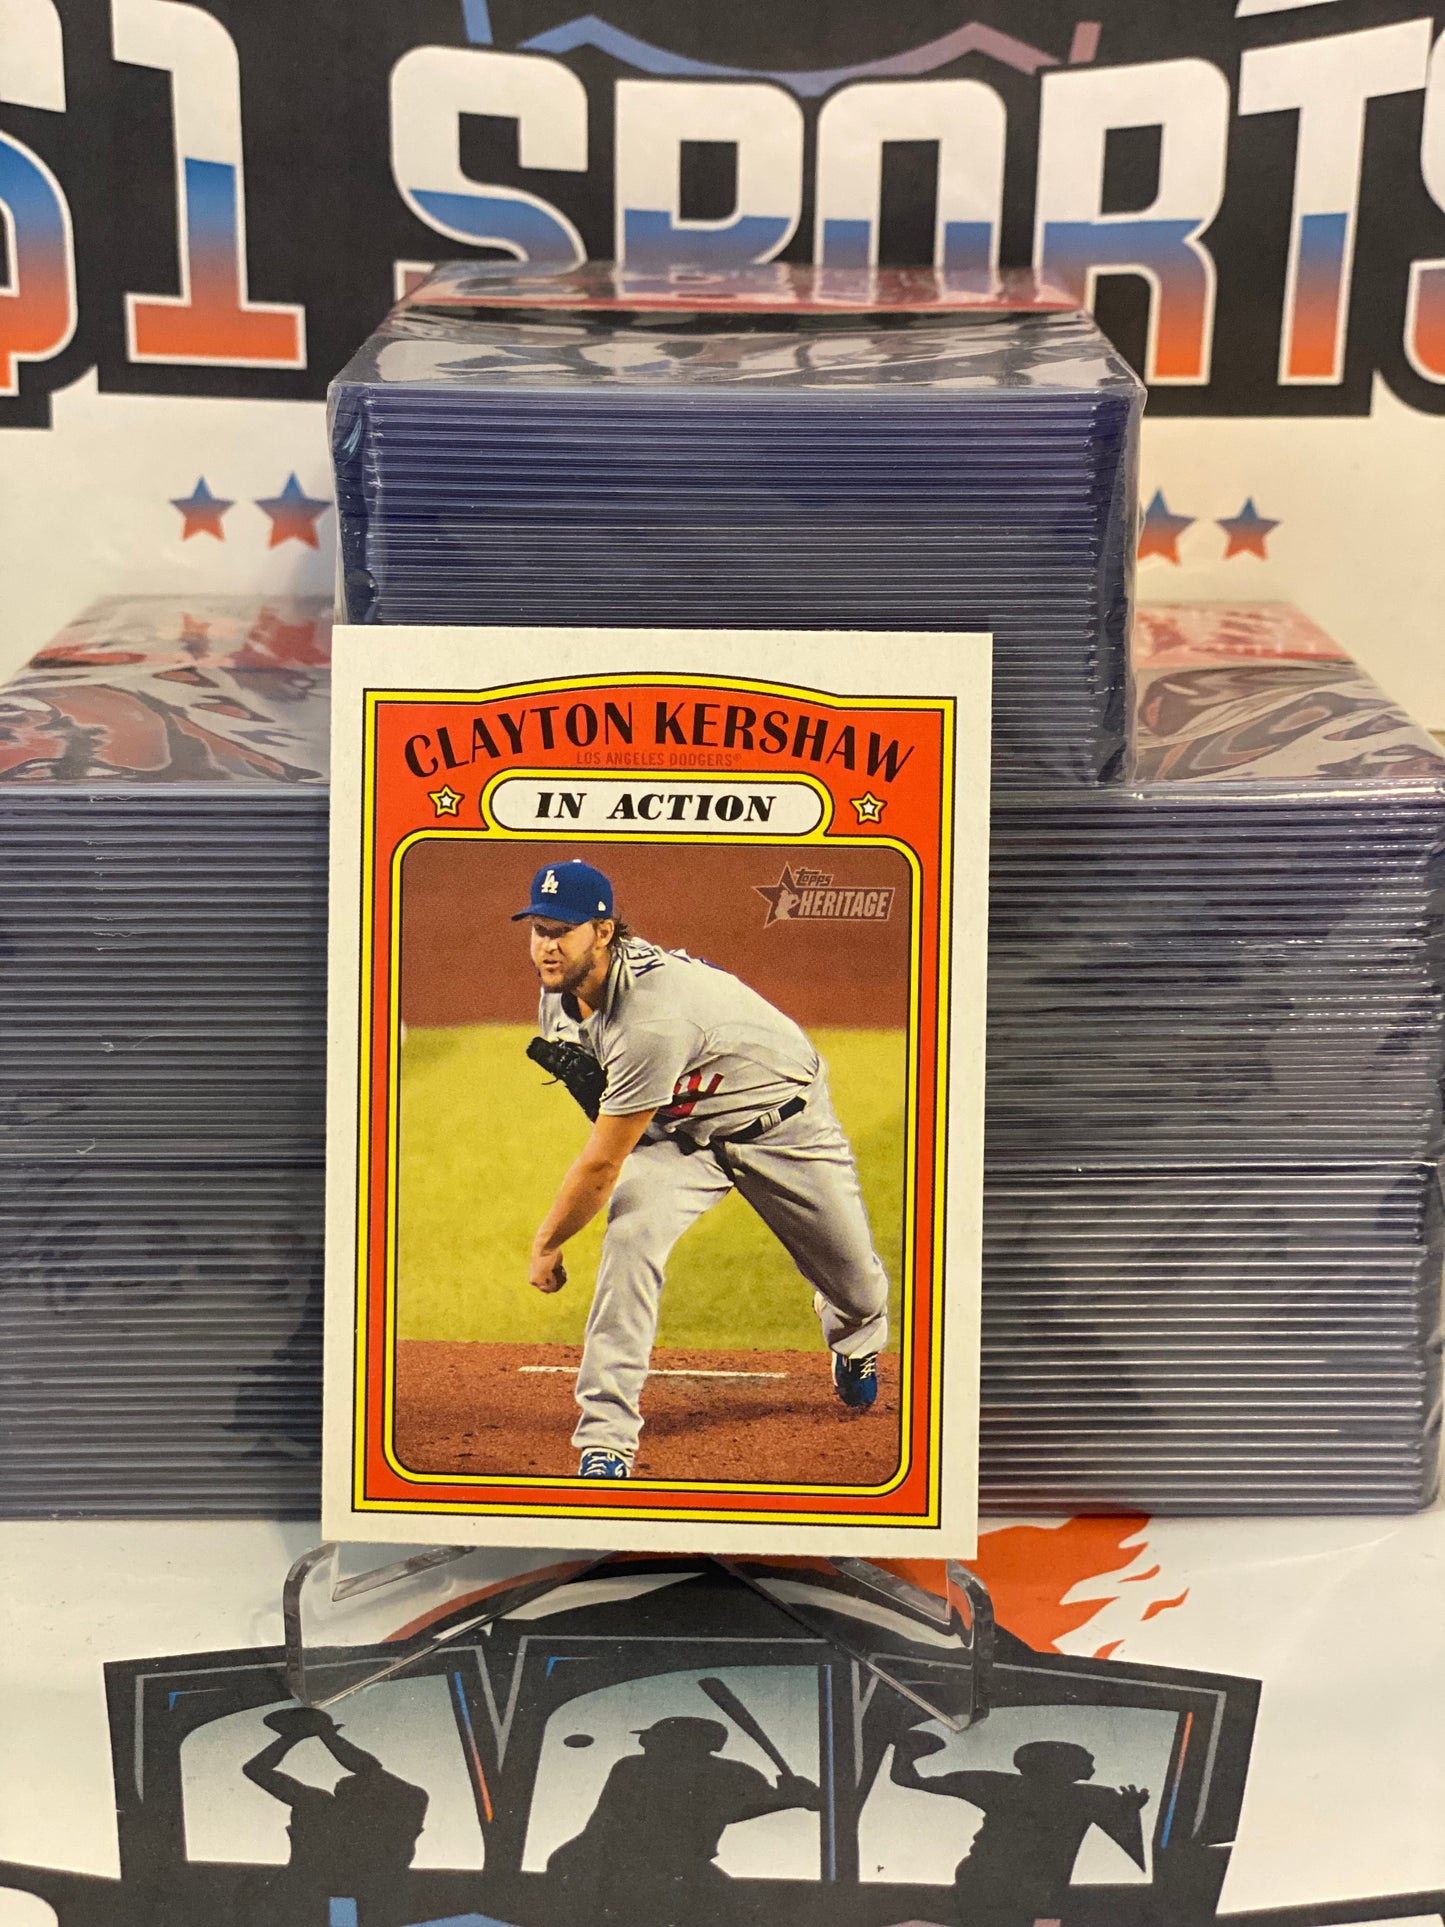 2021 Topps Heritage (In Action) Clayton Kershaw #38